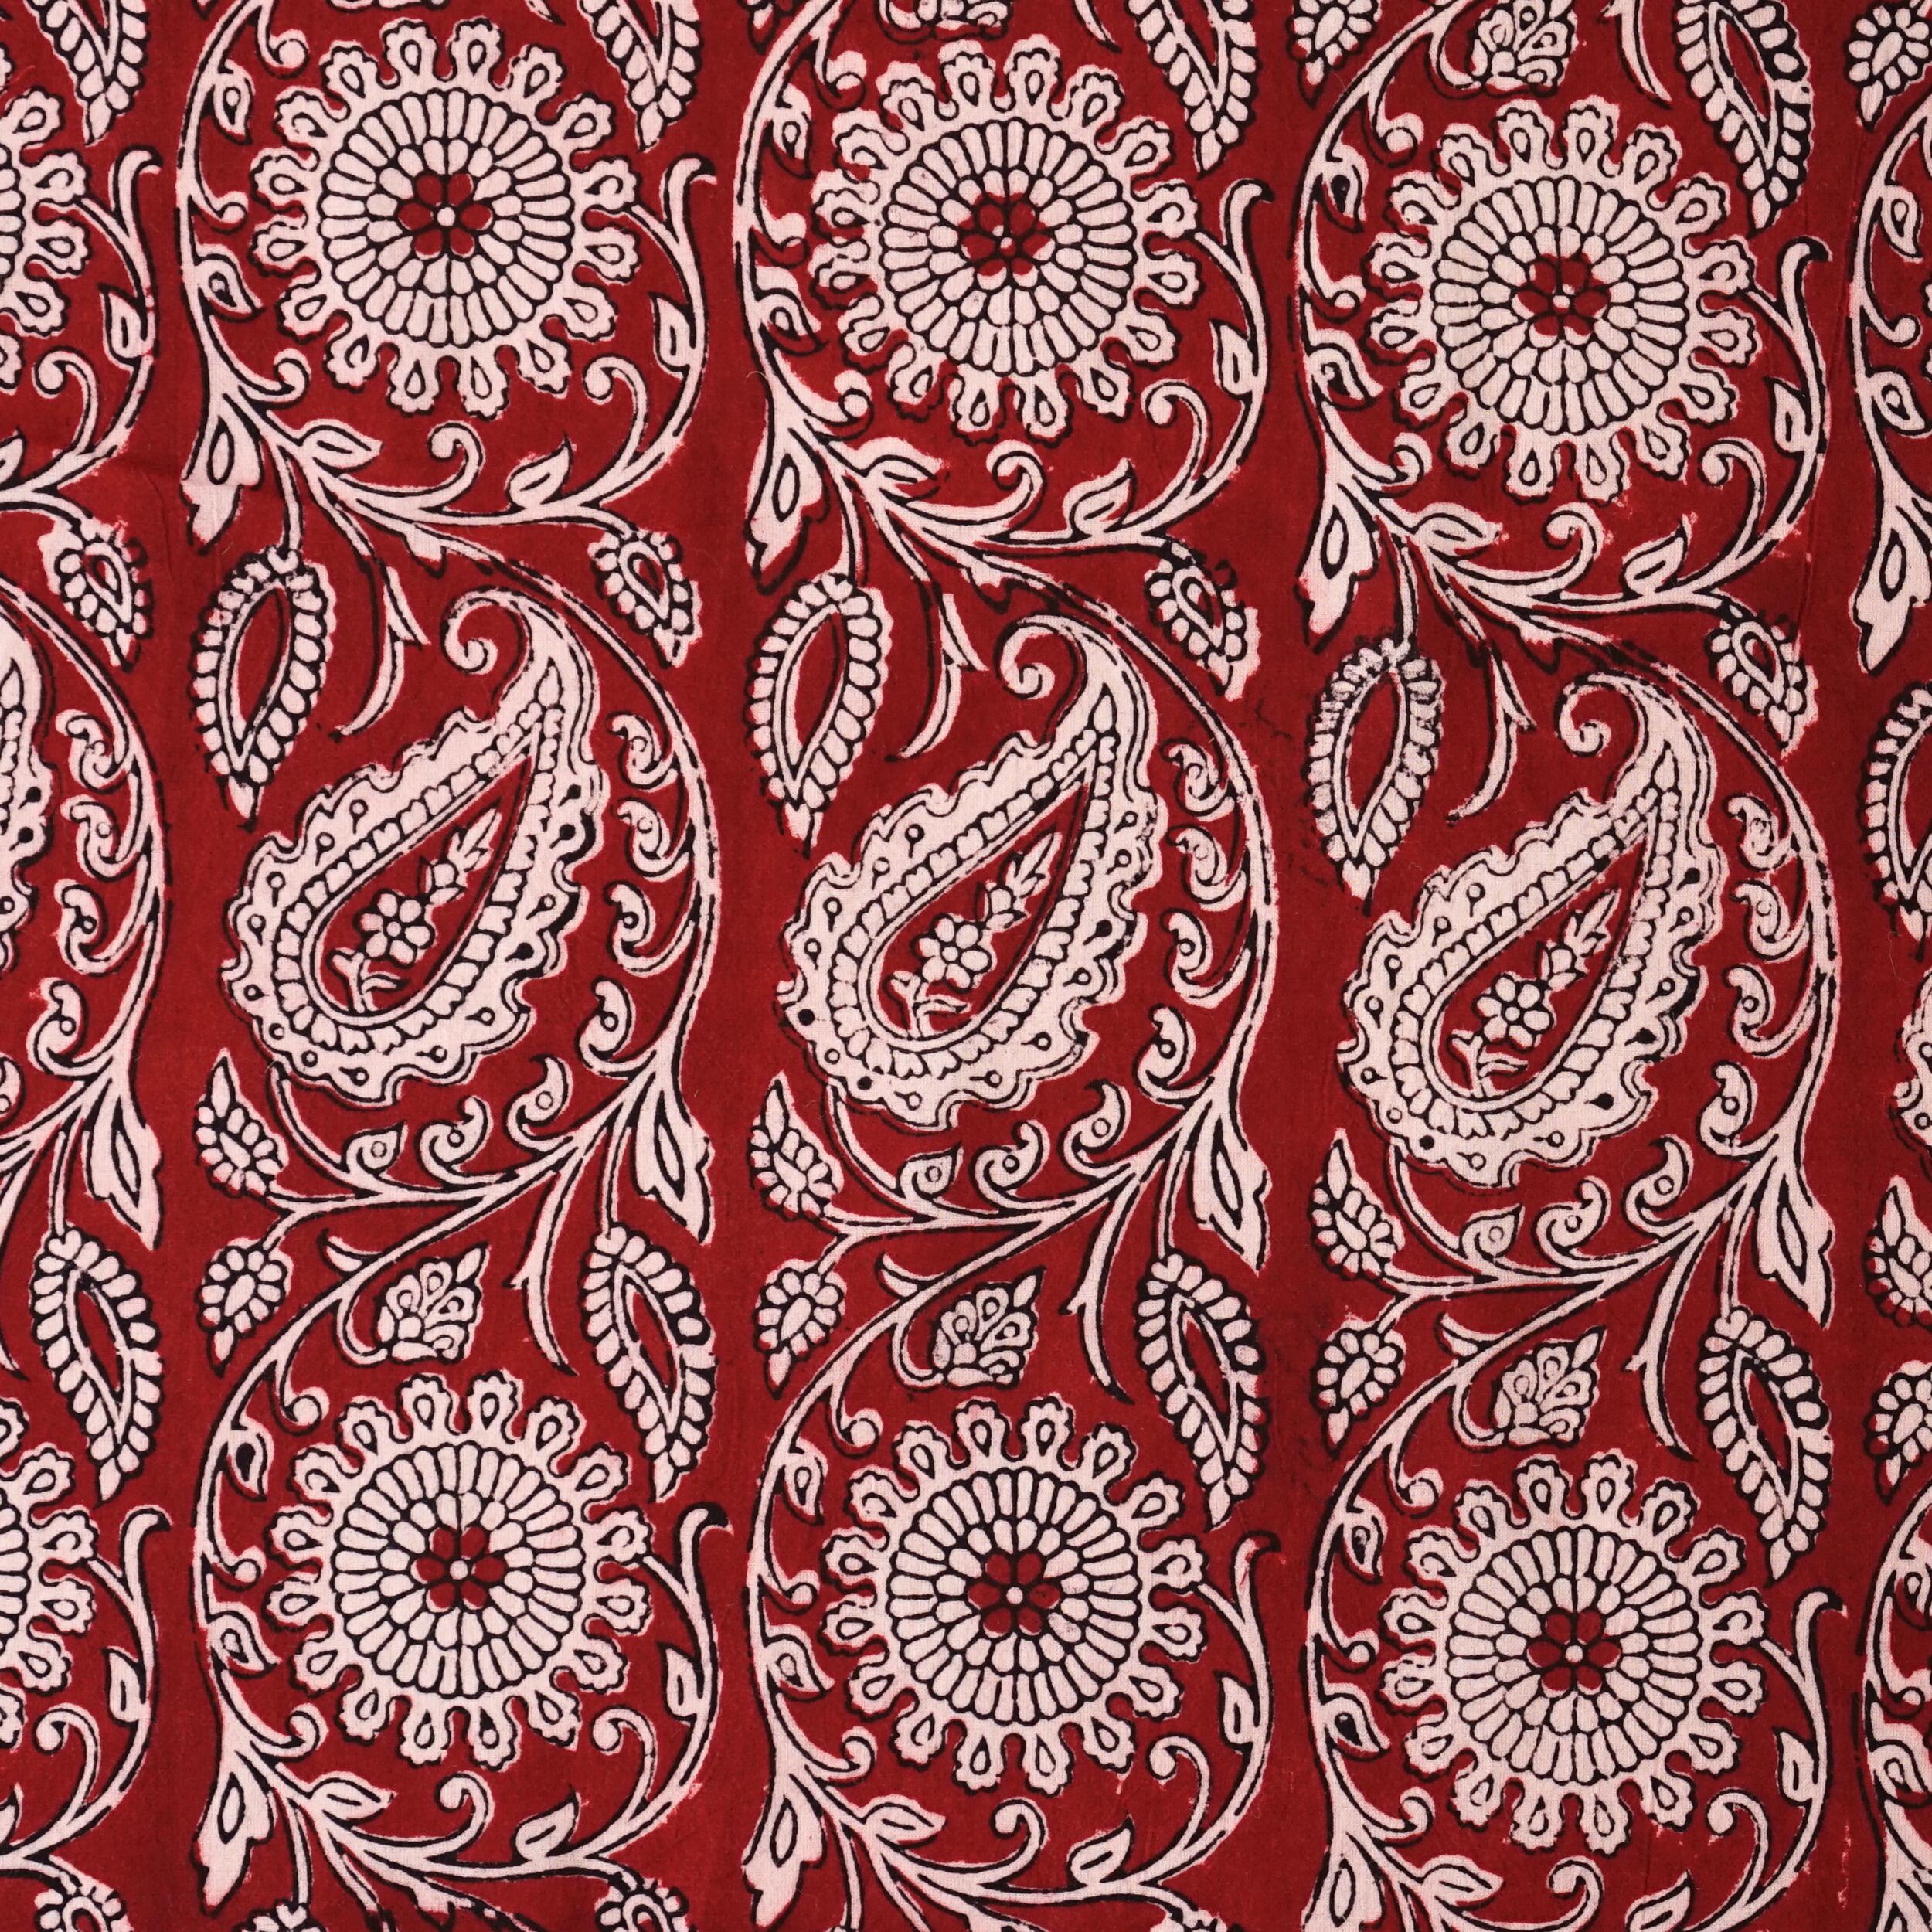 2 - ISK11 - 100% Block-Printed Cotton Fabric From India - Sichuan Pepper Design - Iron Rust Black & Alizarin Red Dyes - Flat